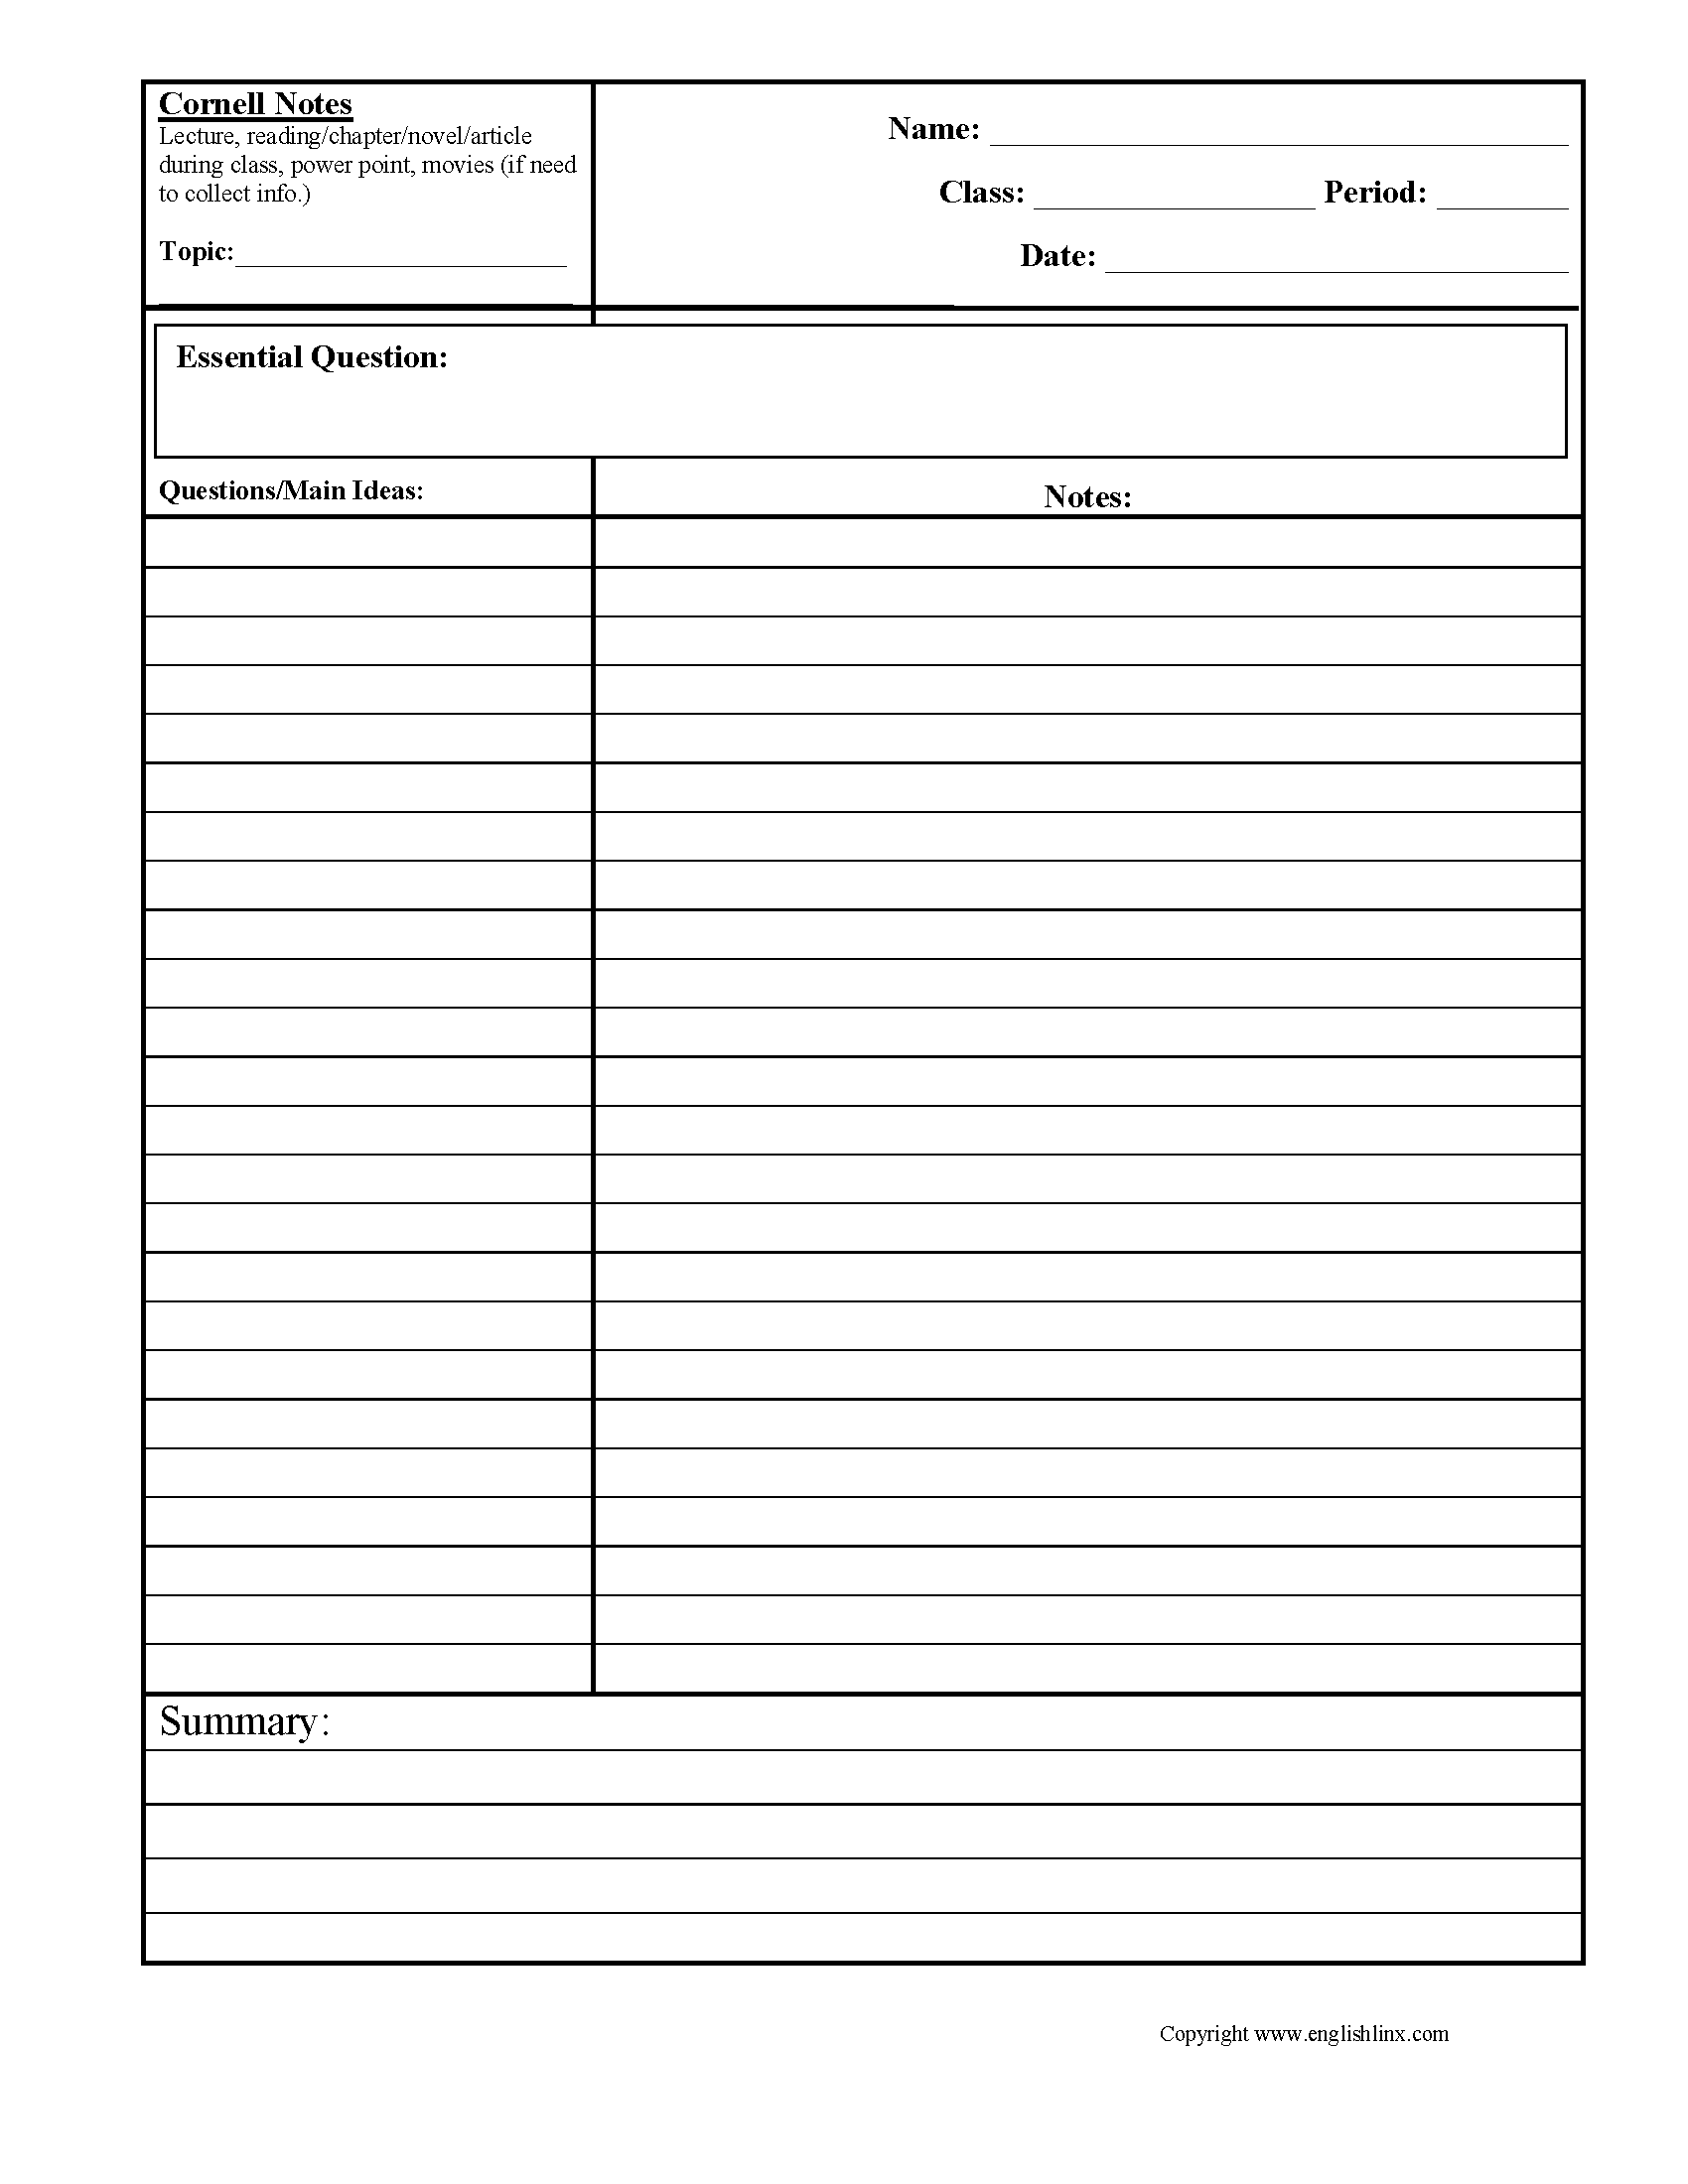 Cornell Notes Lined Writing Paper